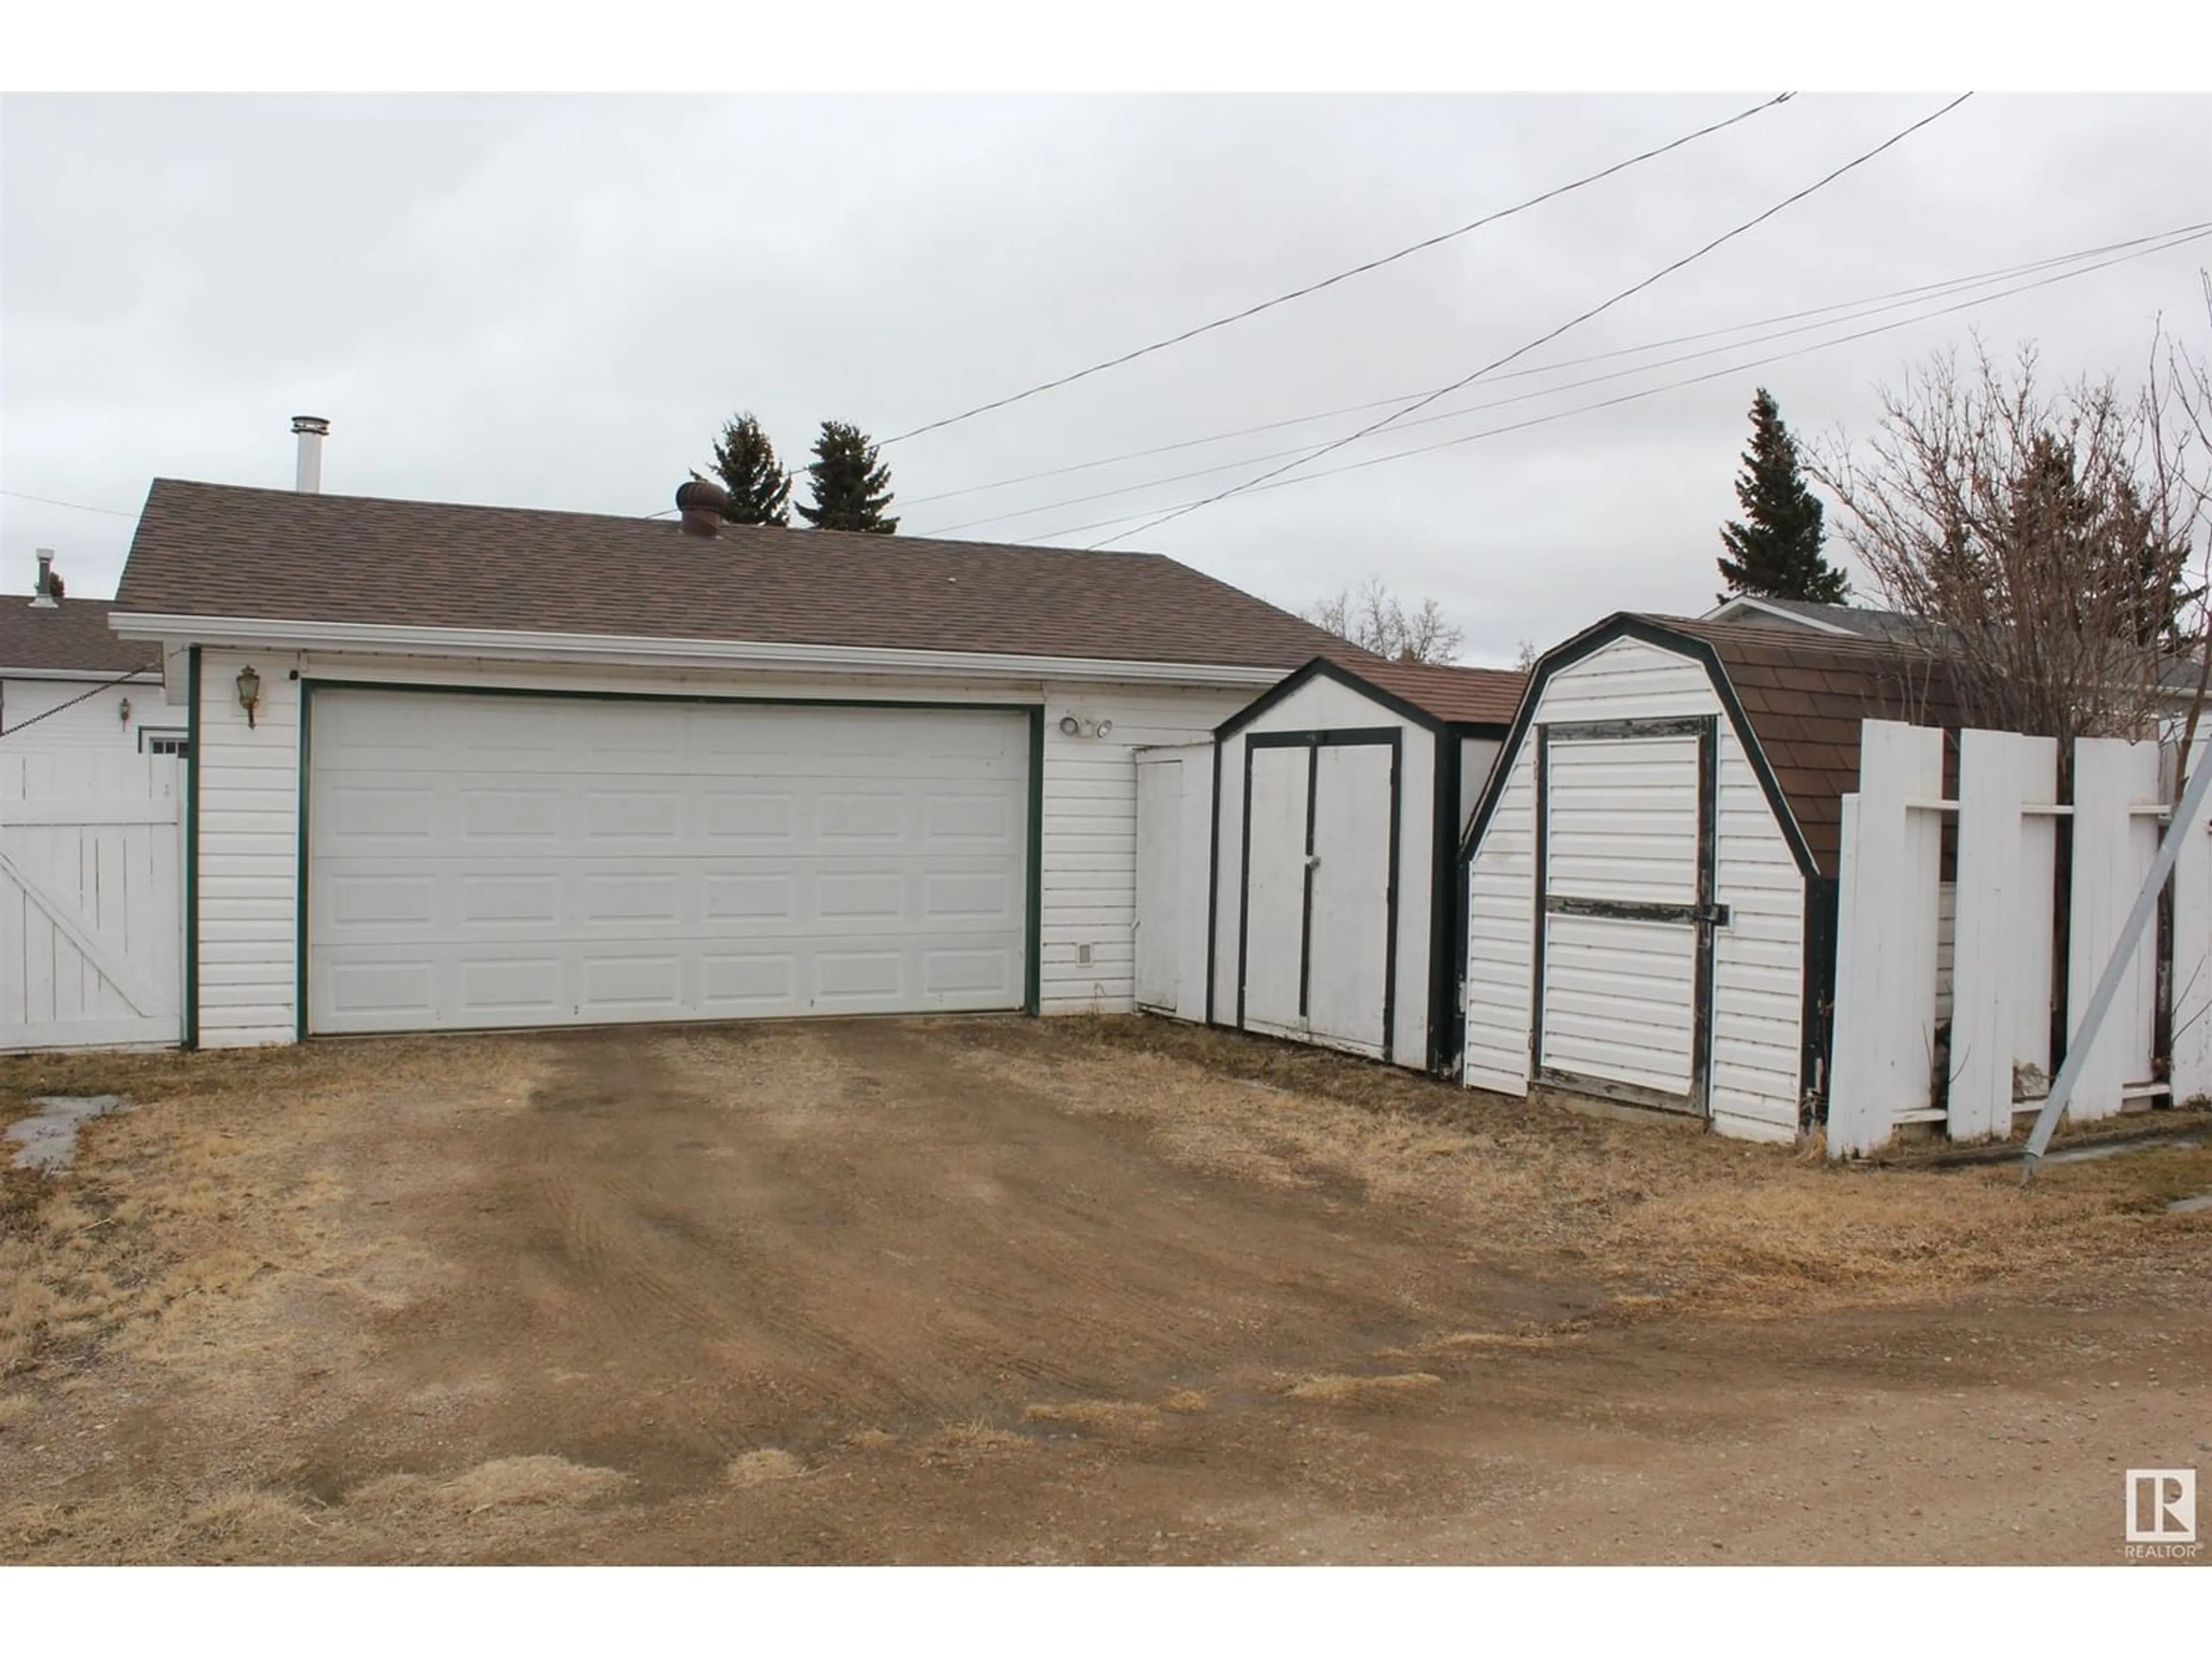 Shed for 5126 55 AV, St. Paul Town Alberta T0A3A1